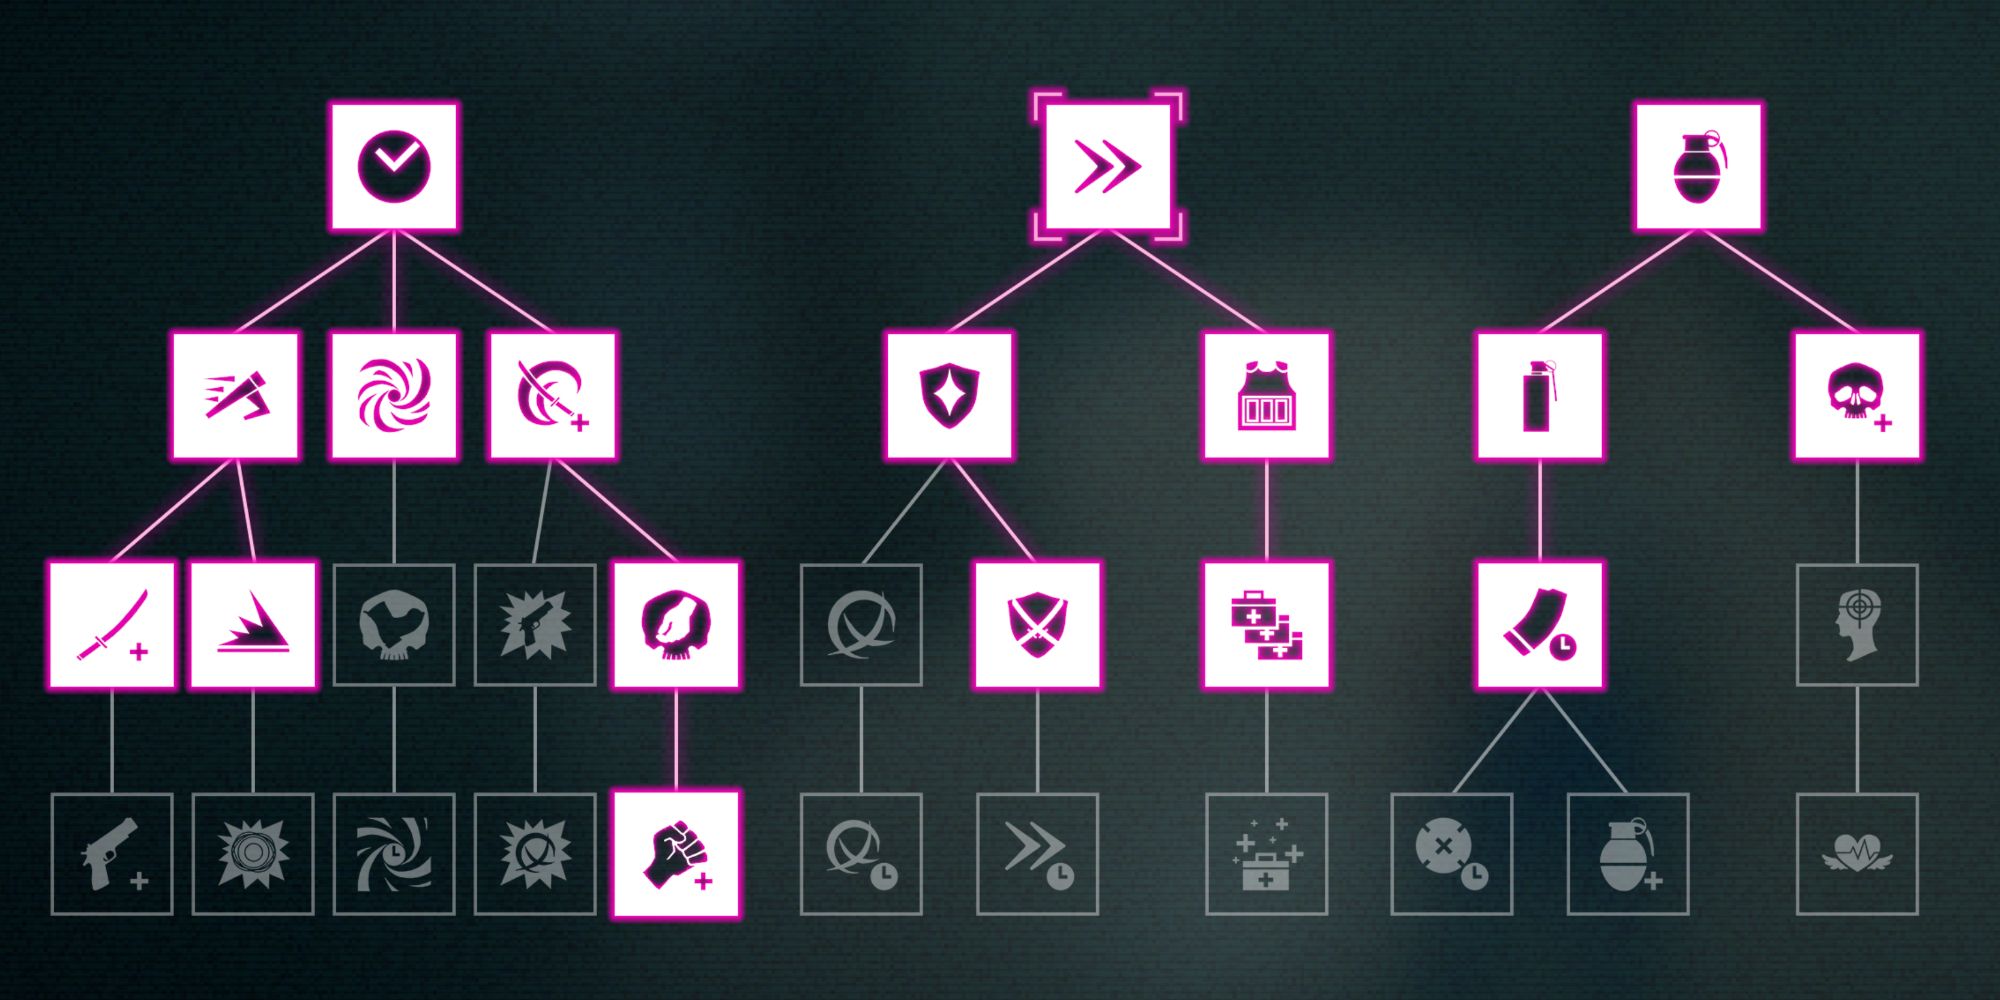 The Skill Trees Menu in Wanted: Dead, showcasing the Offense, Defense, and Utility Skills.